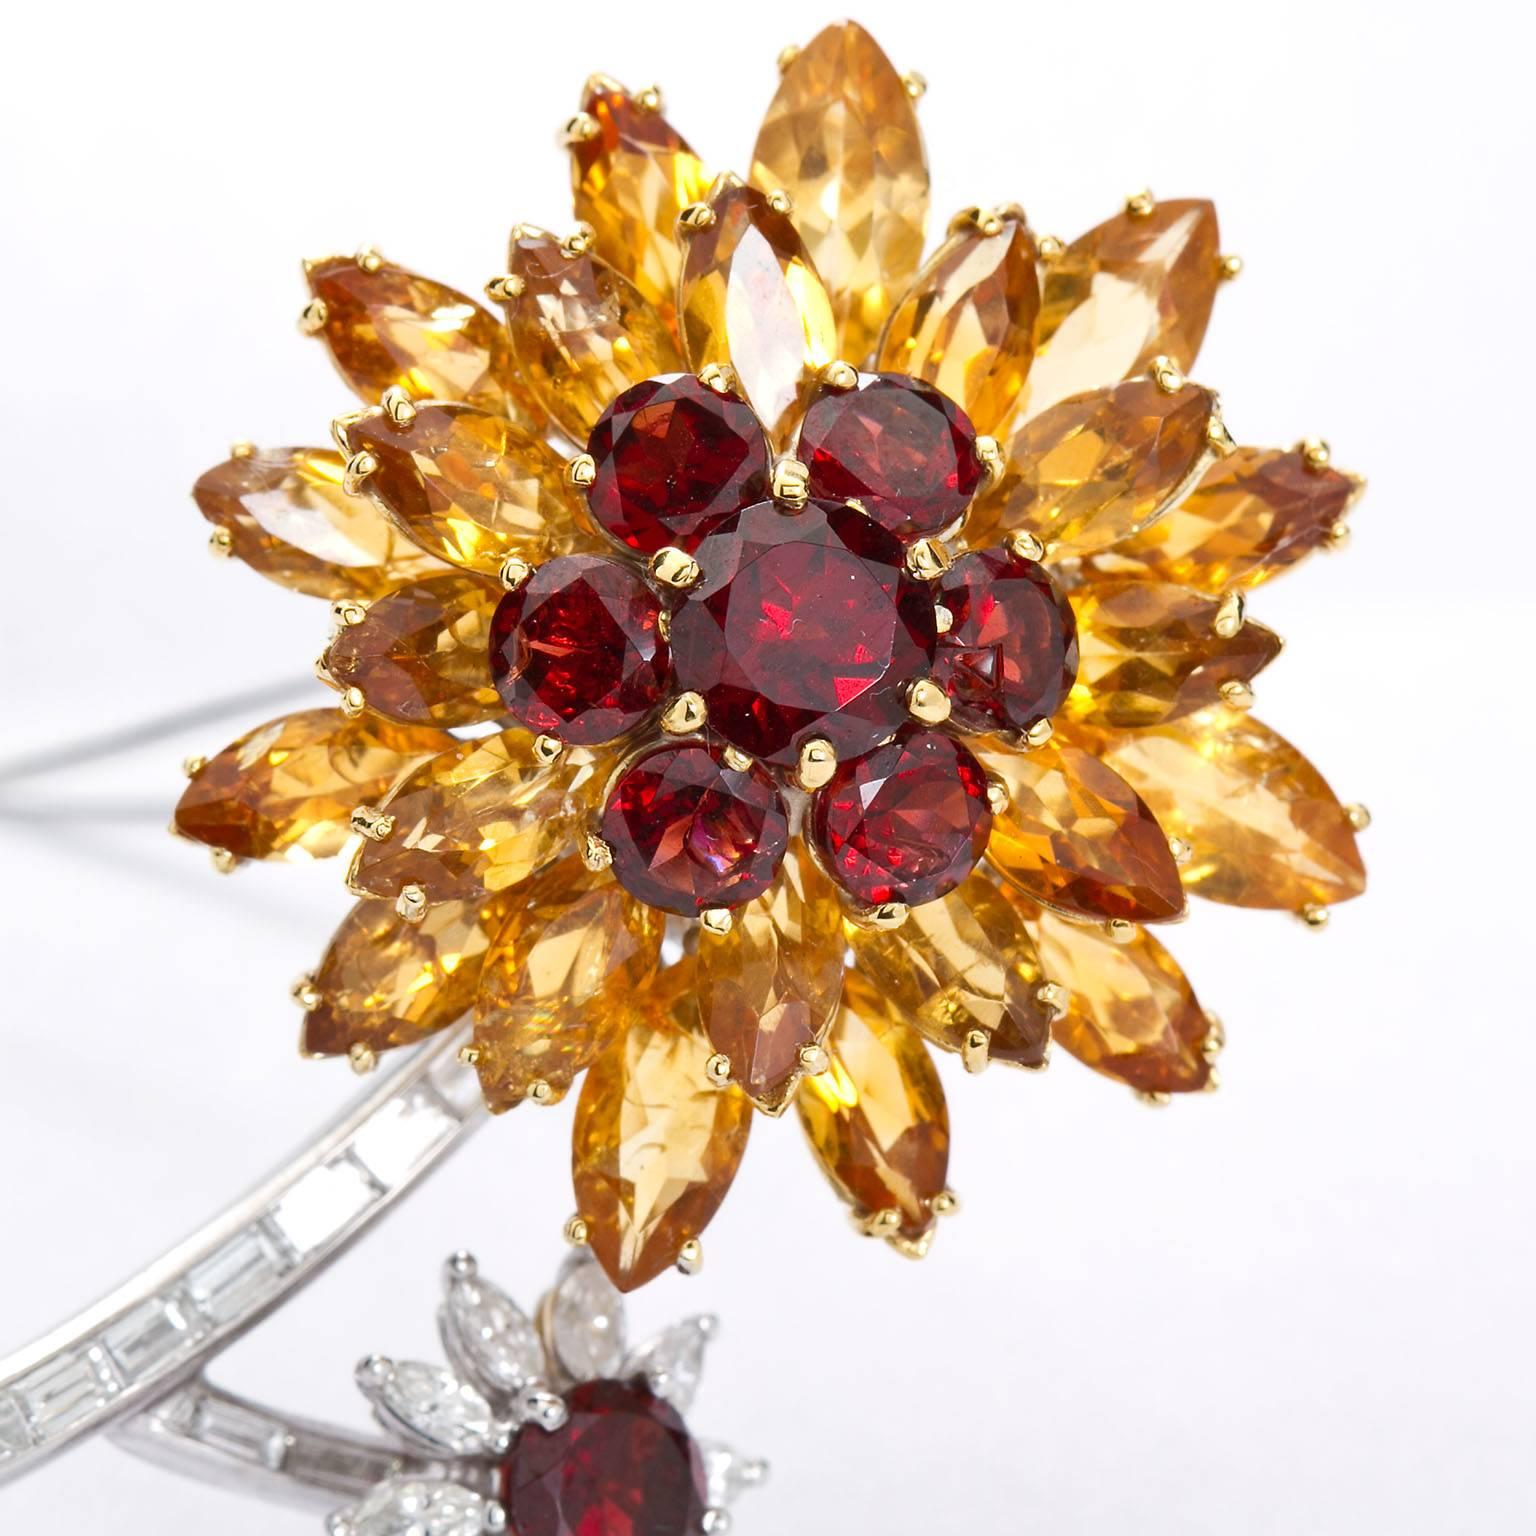 A hand crafted diamond and garnet flower brooch contains approx. 35 carats of amber and red garnets set in platinum with calibrated baguette shaped and marquise shaped diamonds approx. 4.60 ctw. 

Measures: 2.75 inches by 1.5 inches.

No. 7632